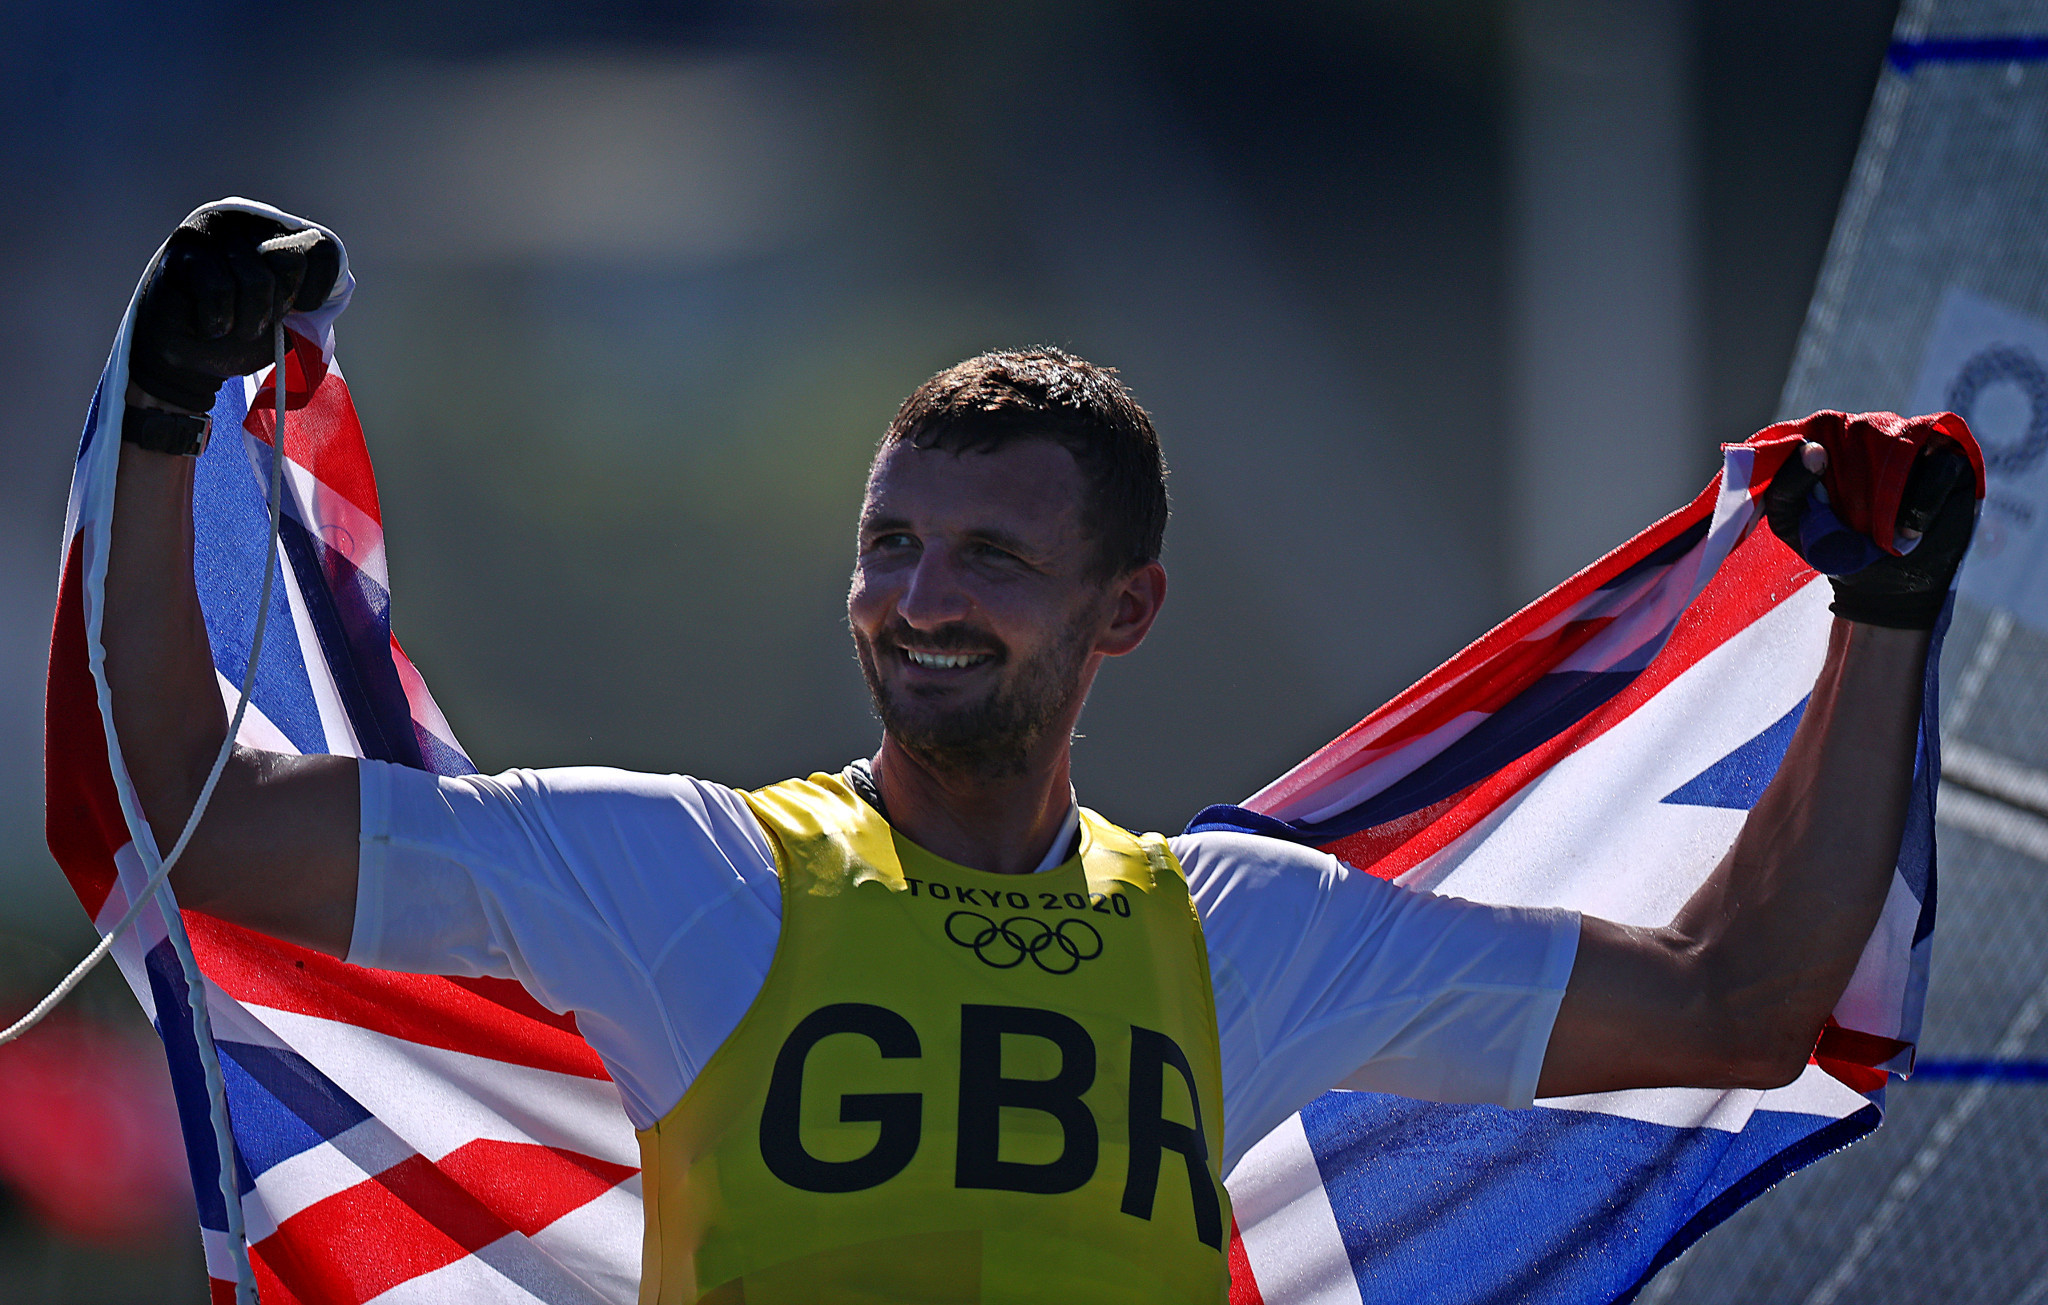 Giles Scott won the men's finn title at Rio 2016 and Tokyo 2020 ©Getty Images